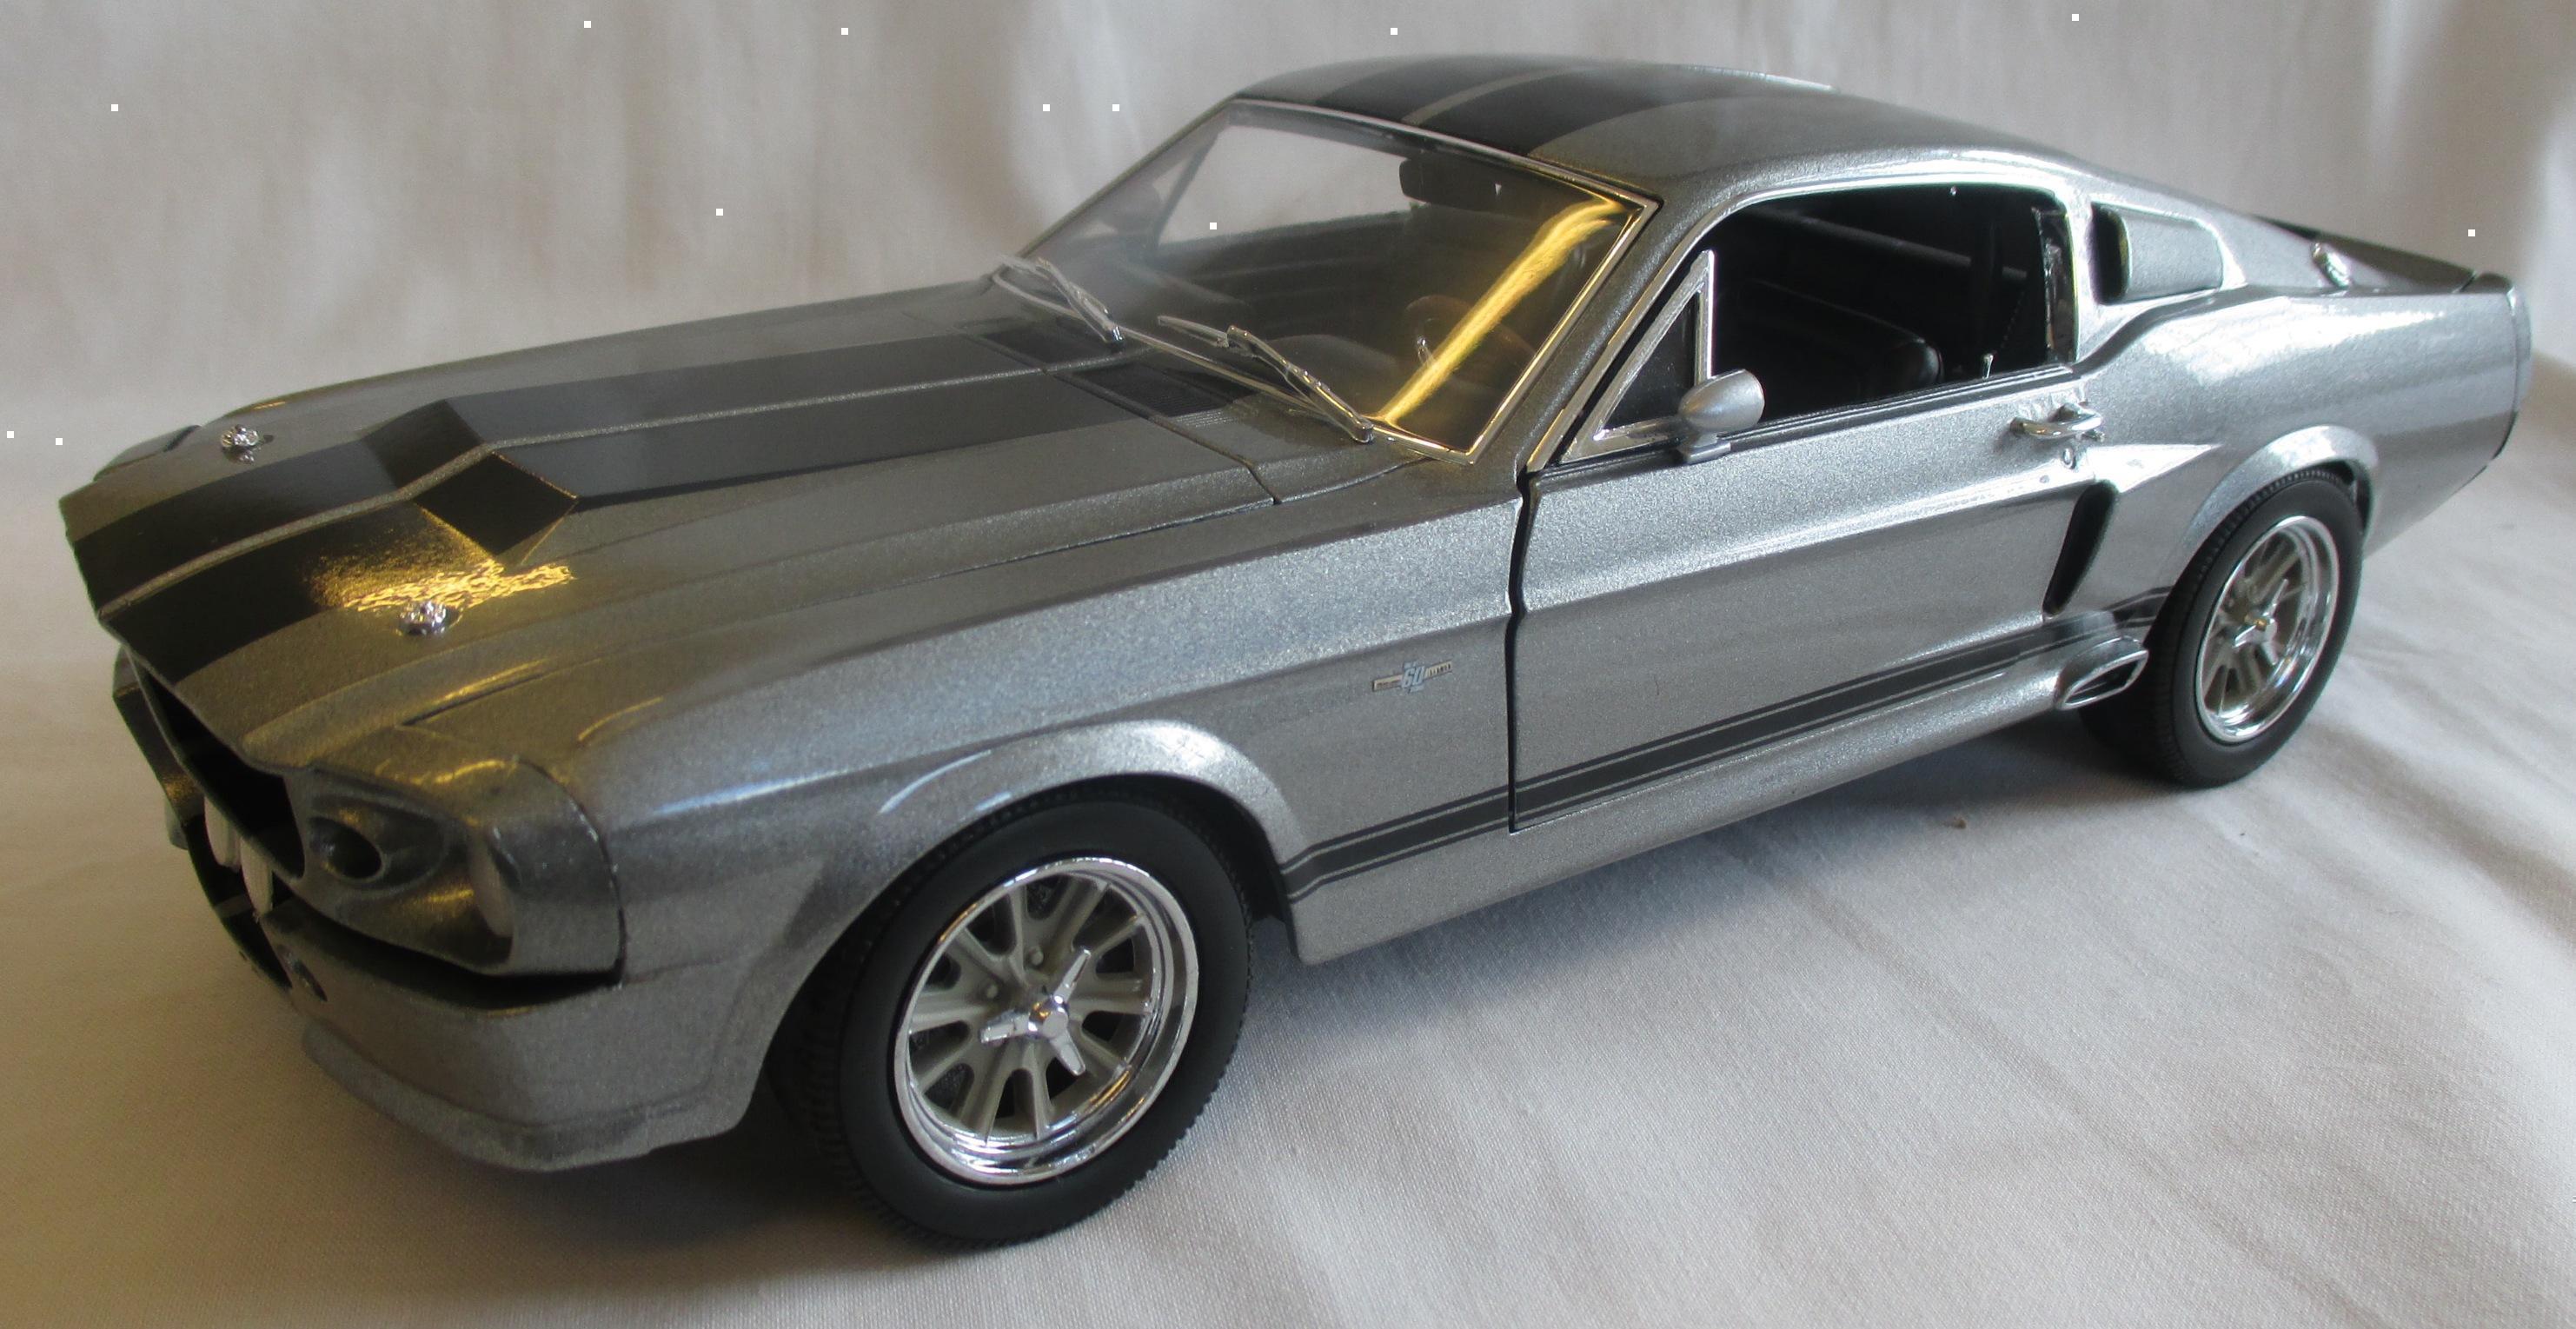 1967 Eleanor Gone In 60 Seconds Collectible Custom Movie Star Mustang Die Cast 1:18 Scale Model Car